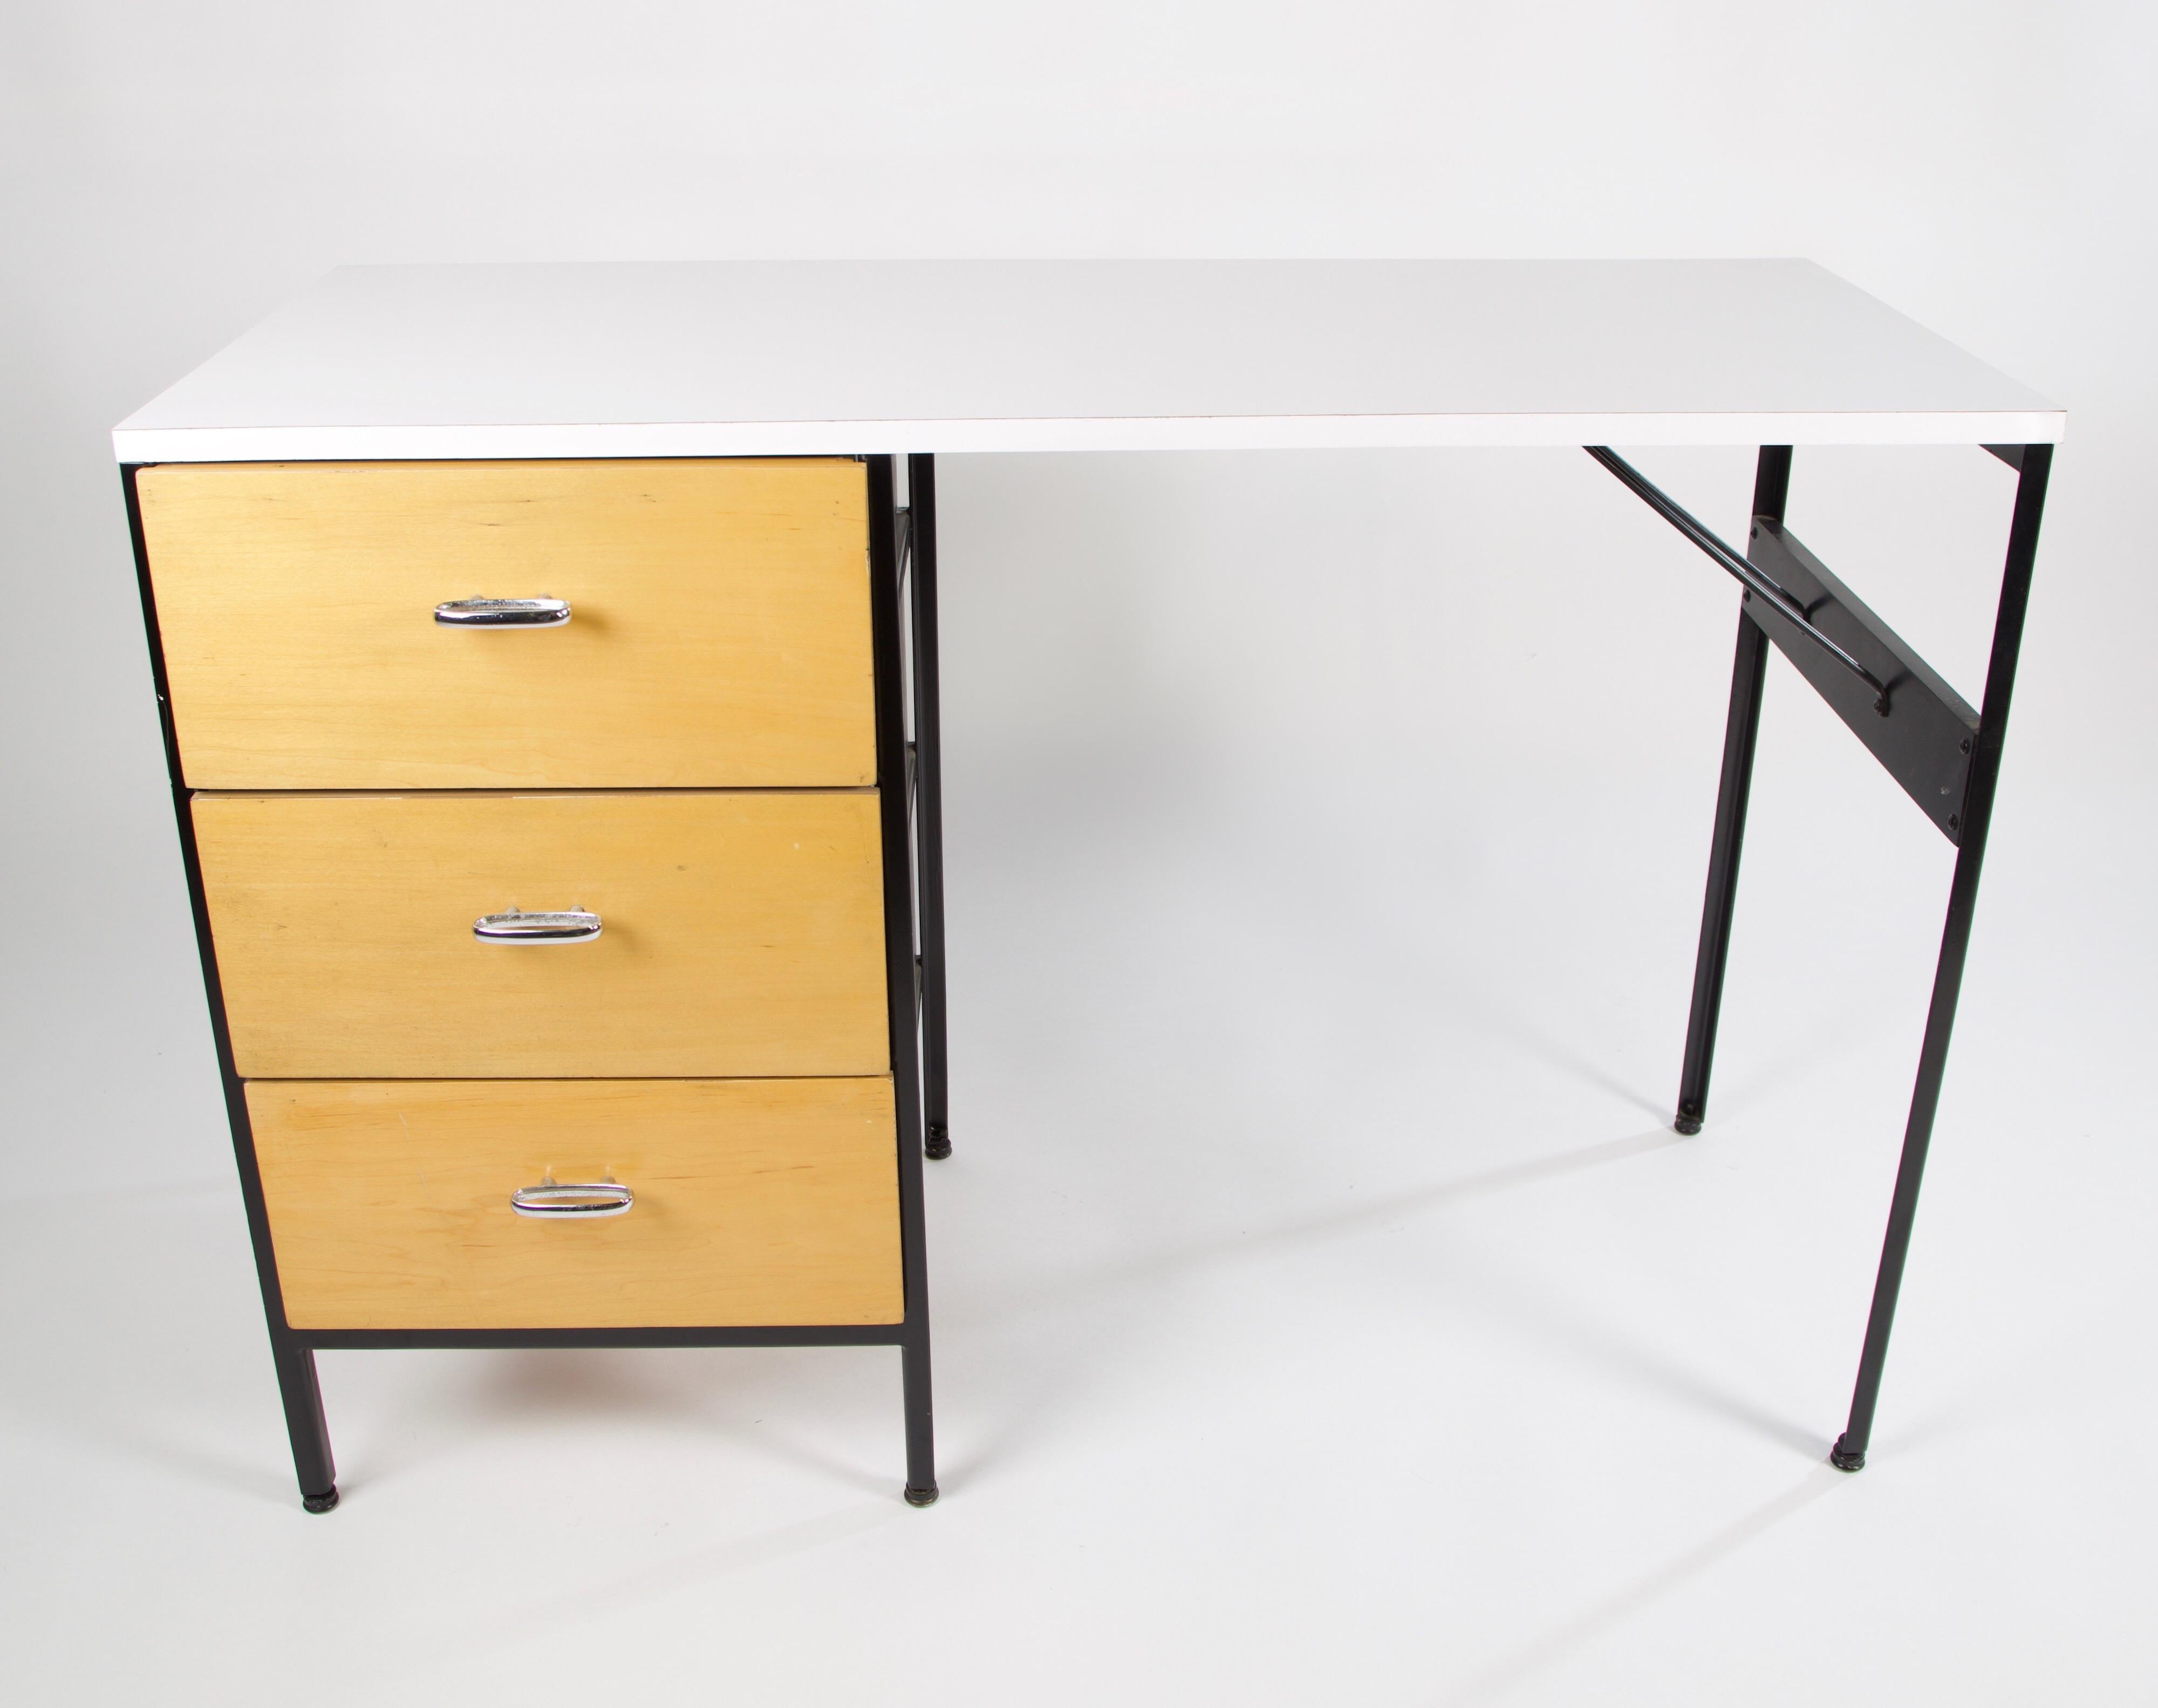 A vintage model 4111 desk from the Steel frame series of furniture by George Nelson & Associates for Herman Miller. This architectural minimalist desk has been restored including a new white formica top. It has 3 drawers with light stained fronts